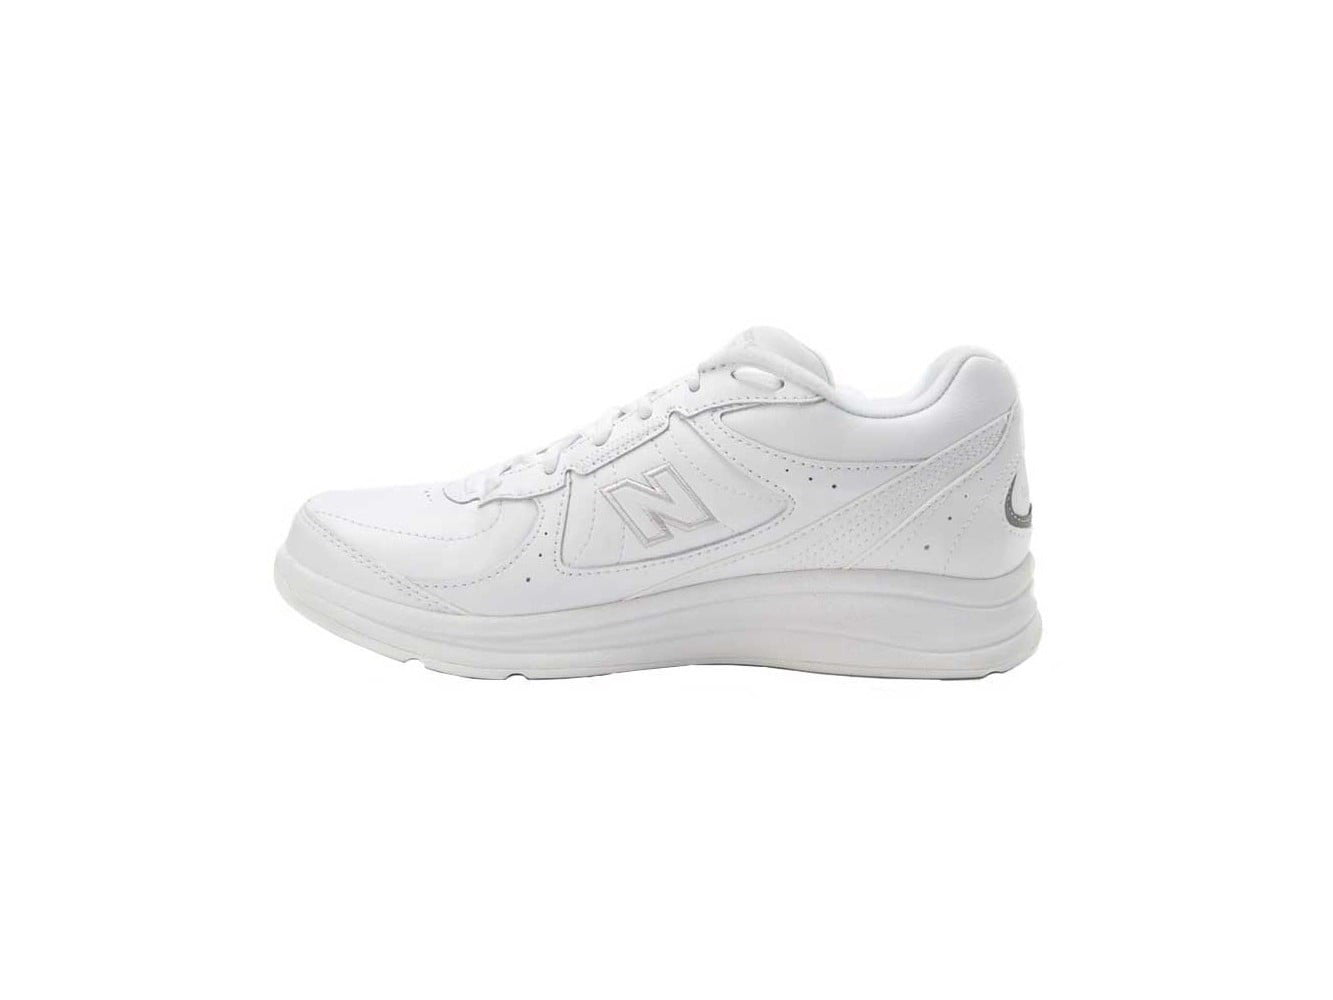 New Balance Mens 577 Low Top Lace Up Walking Shoes, White, Size 9.5 ...